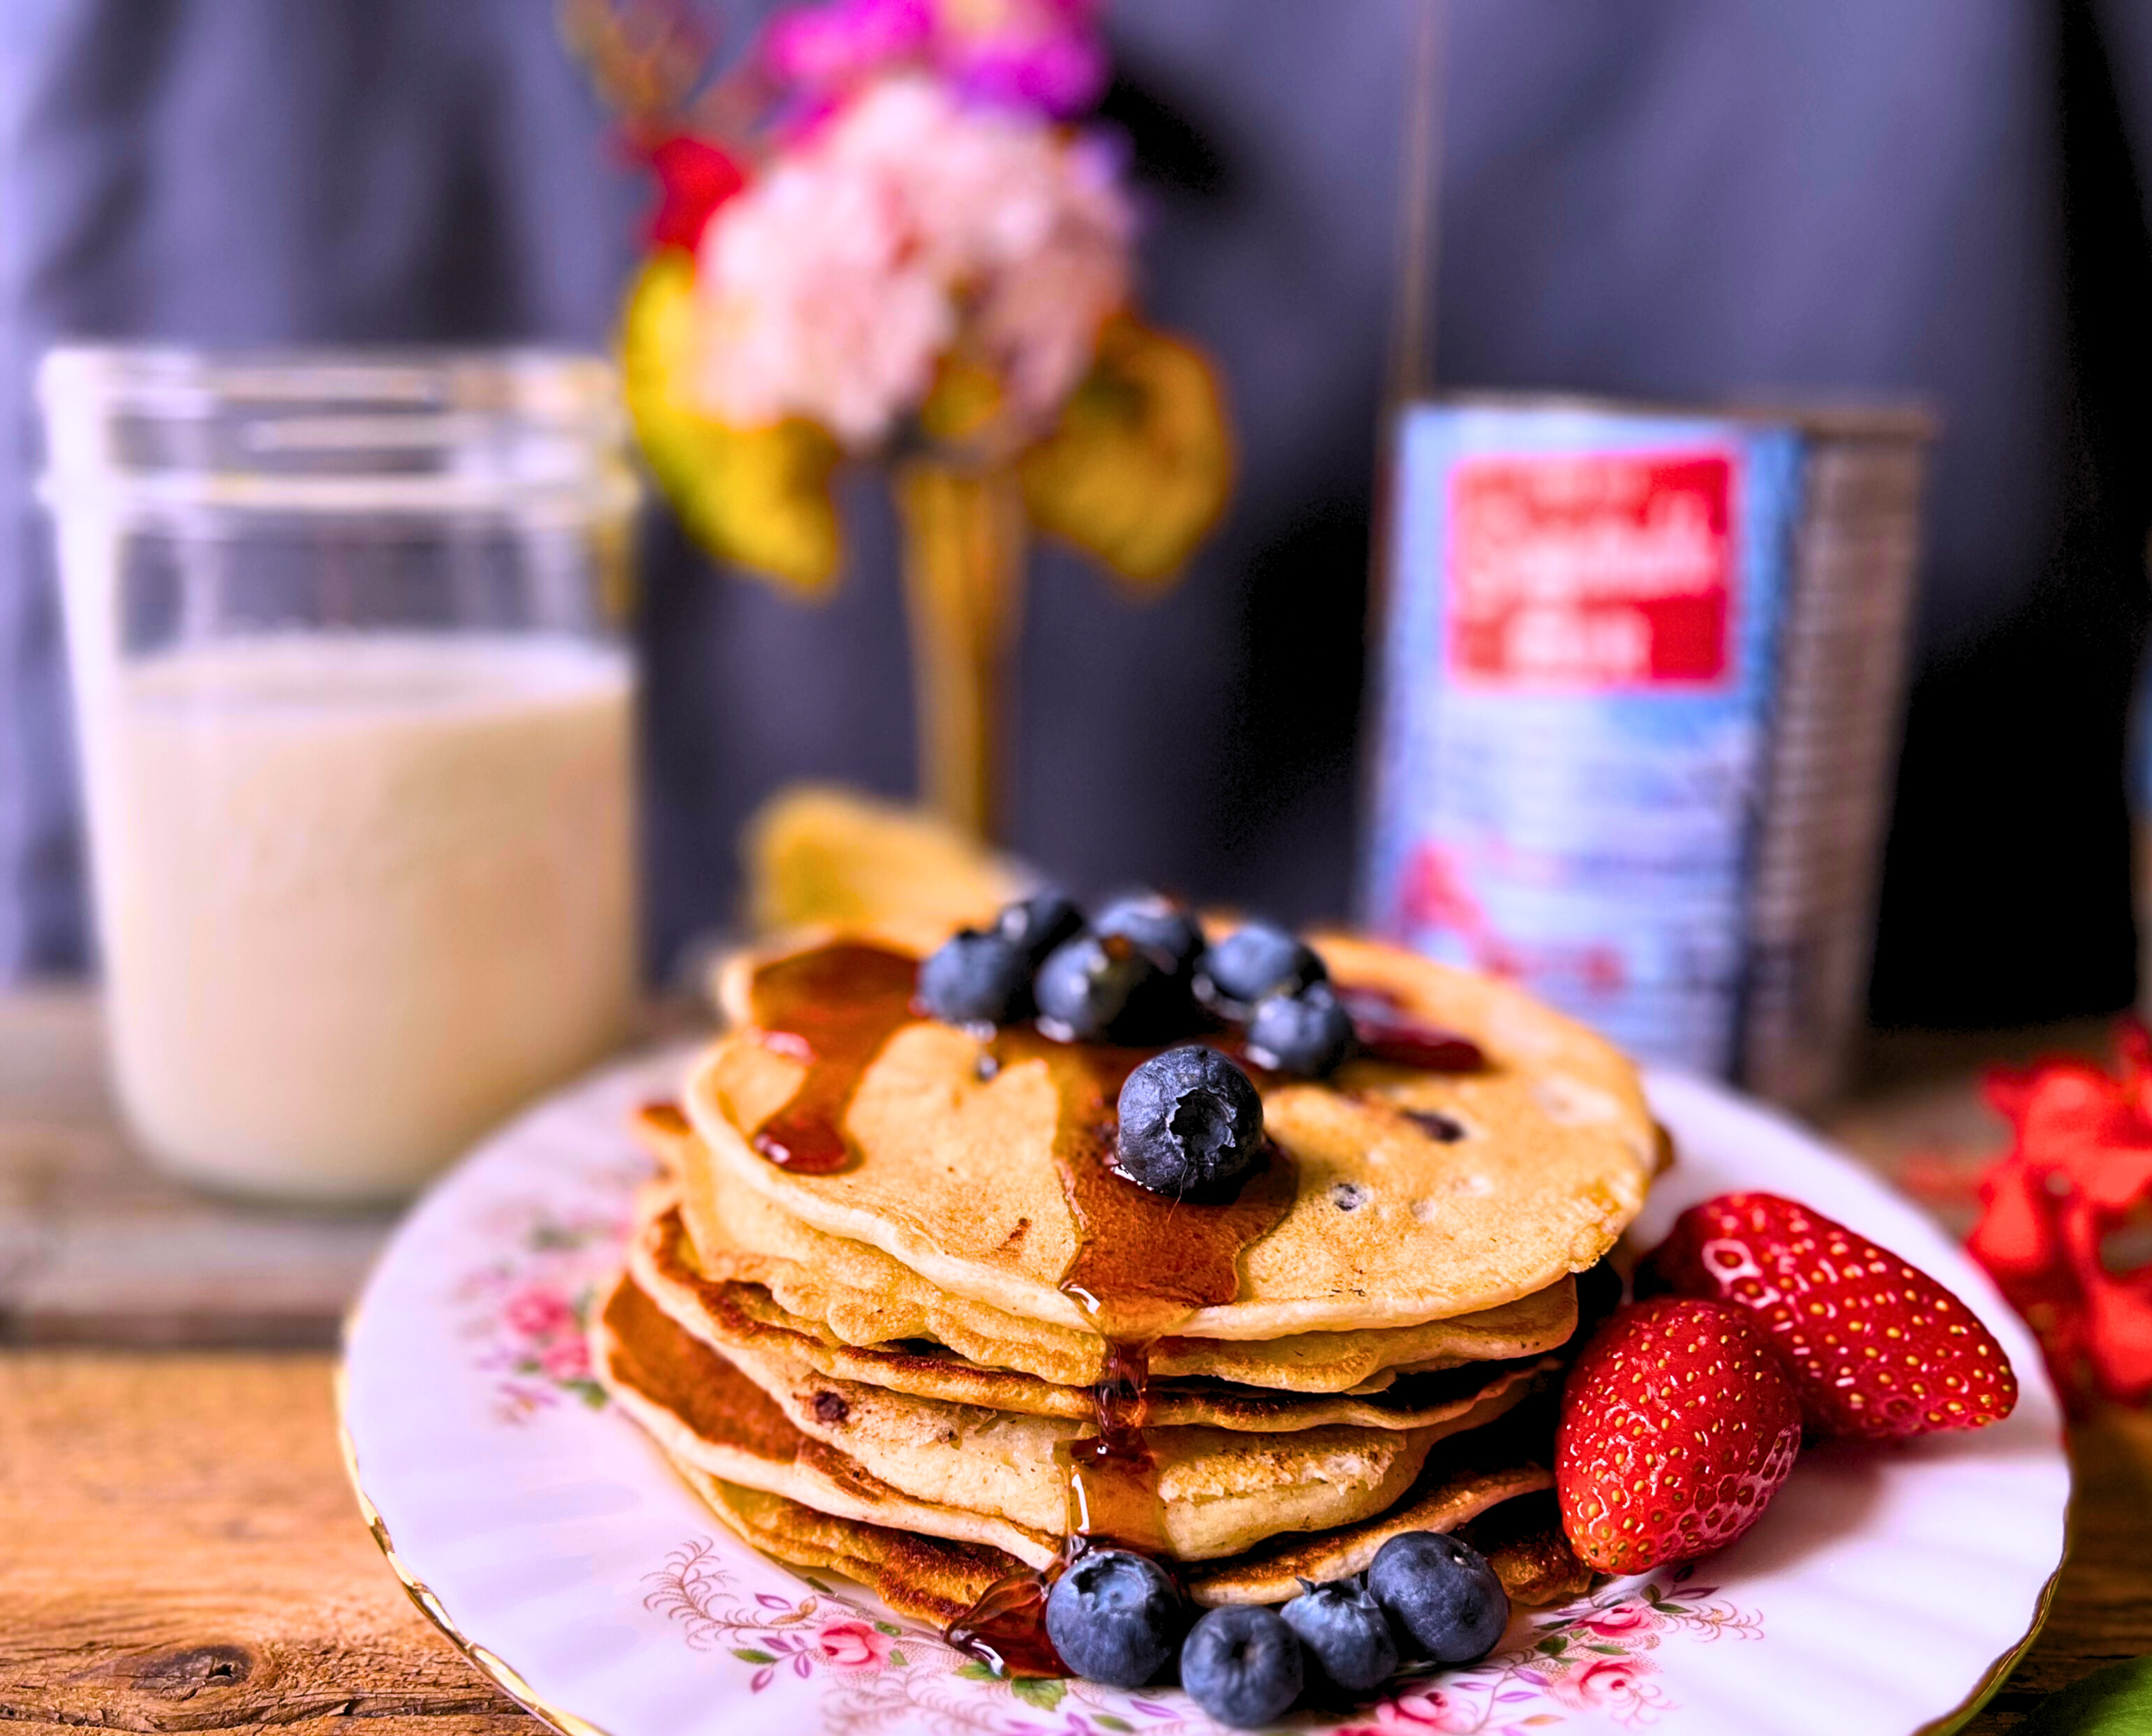 The Best Soft and Thin Pancakes with blueberries, strawberries, and maple syrup. In the background a jar of milk, a tin of maple syrup and an arrangment of flowers in a gold vase.